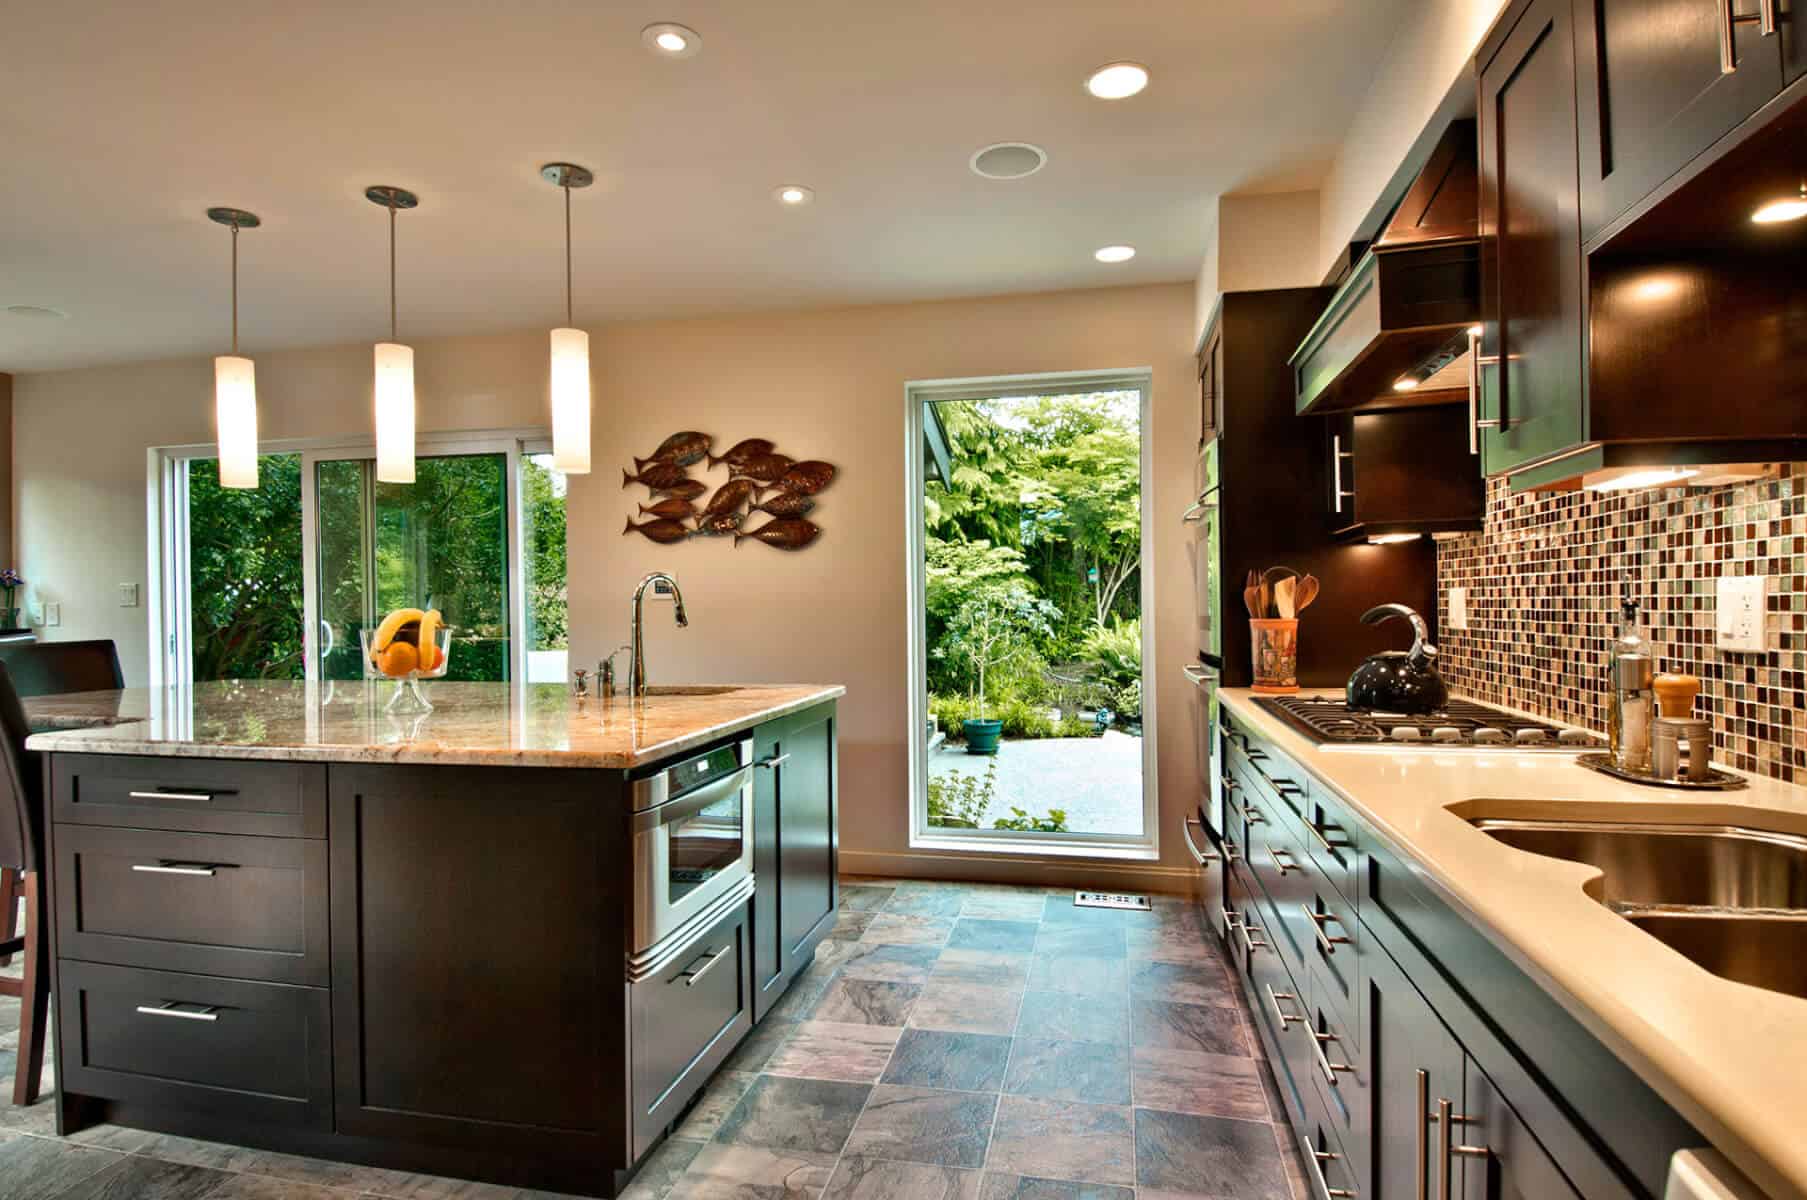 Home renovation specialists in Victoria BC